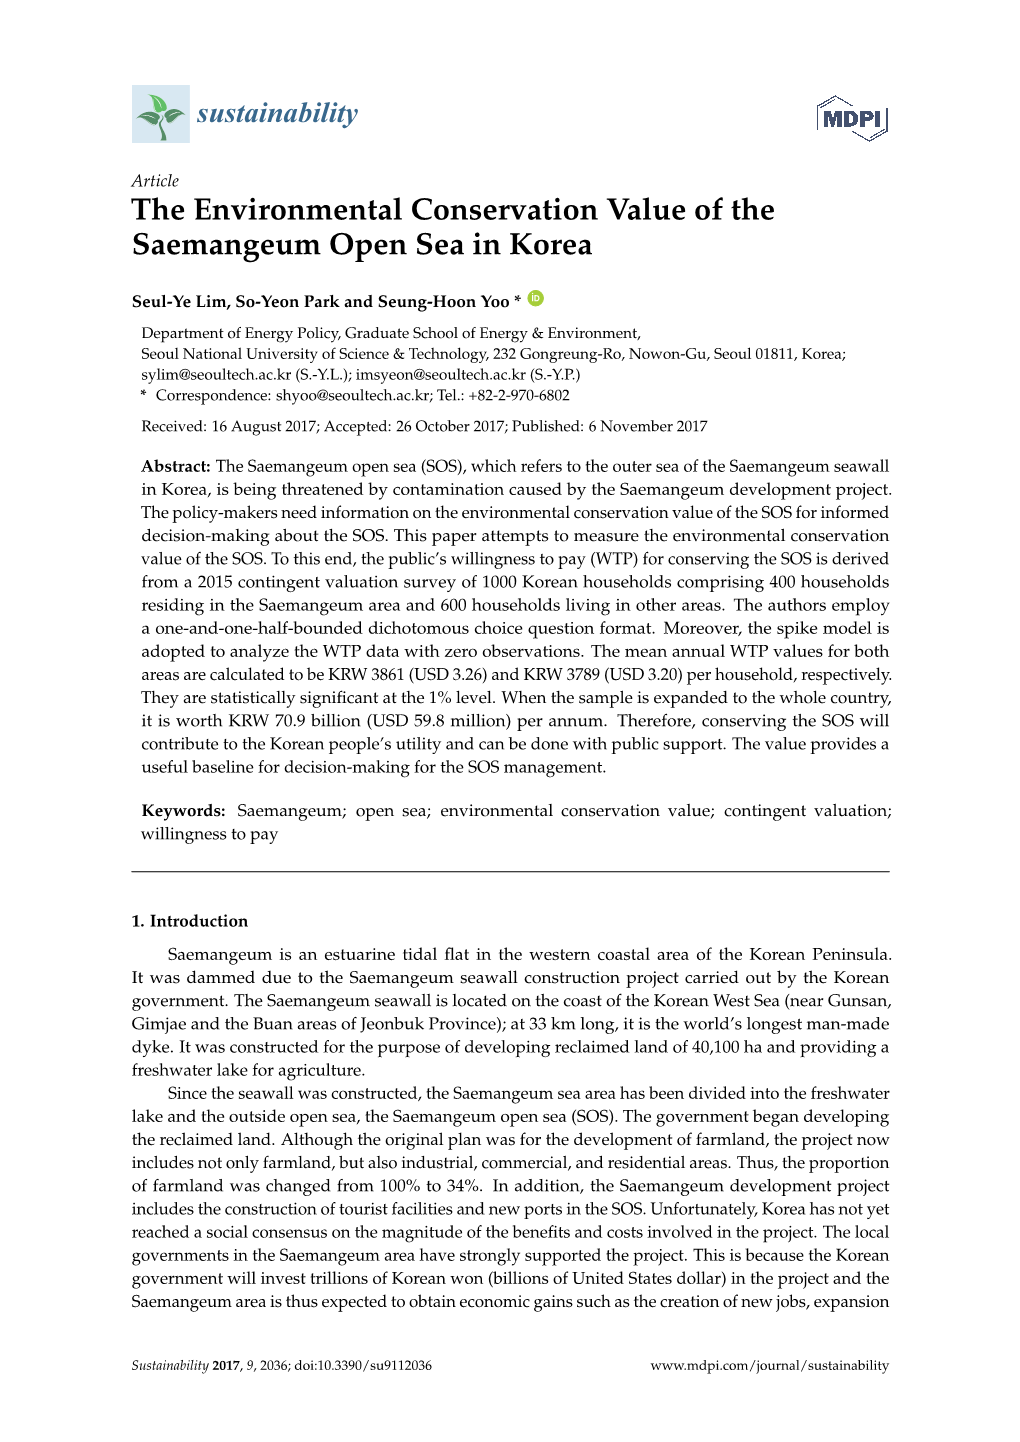 The Environmental Conservation Value of the Saemangeum Open Sea in Korea